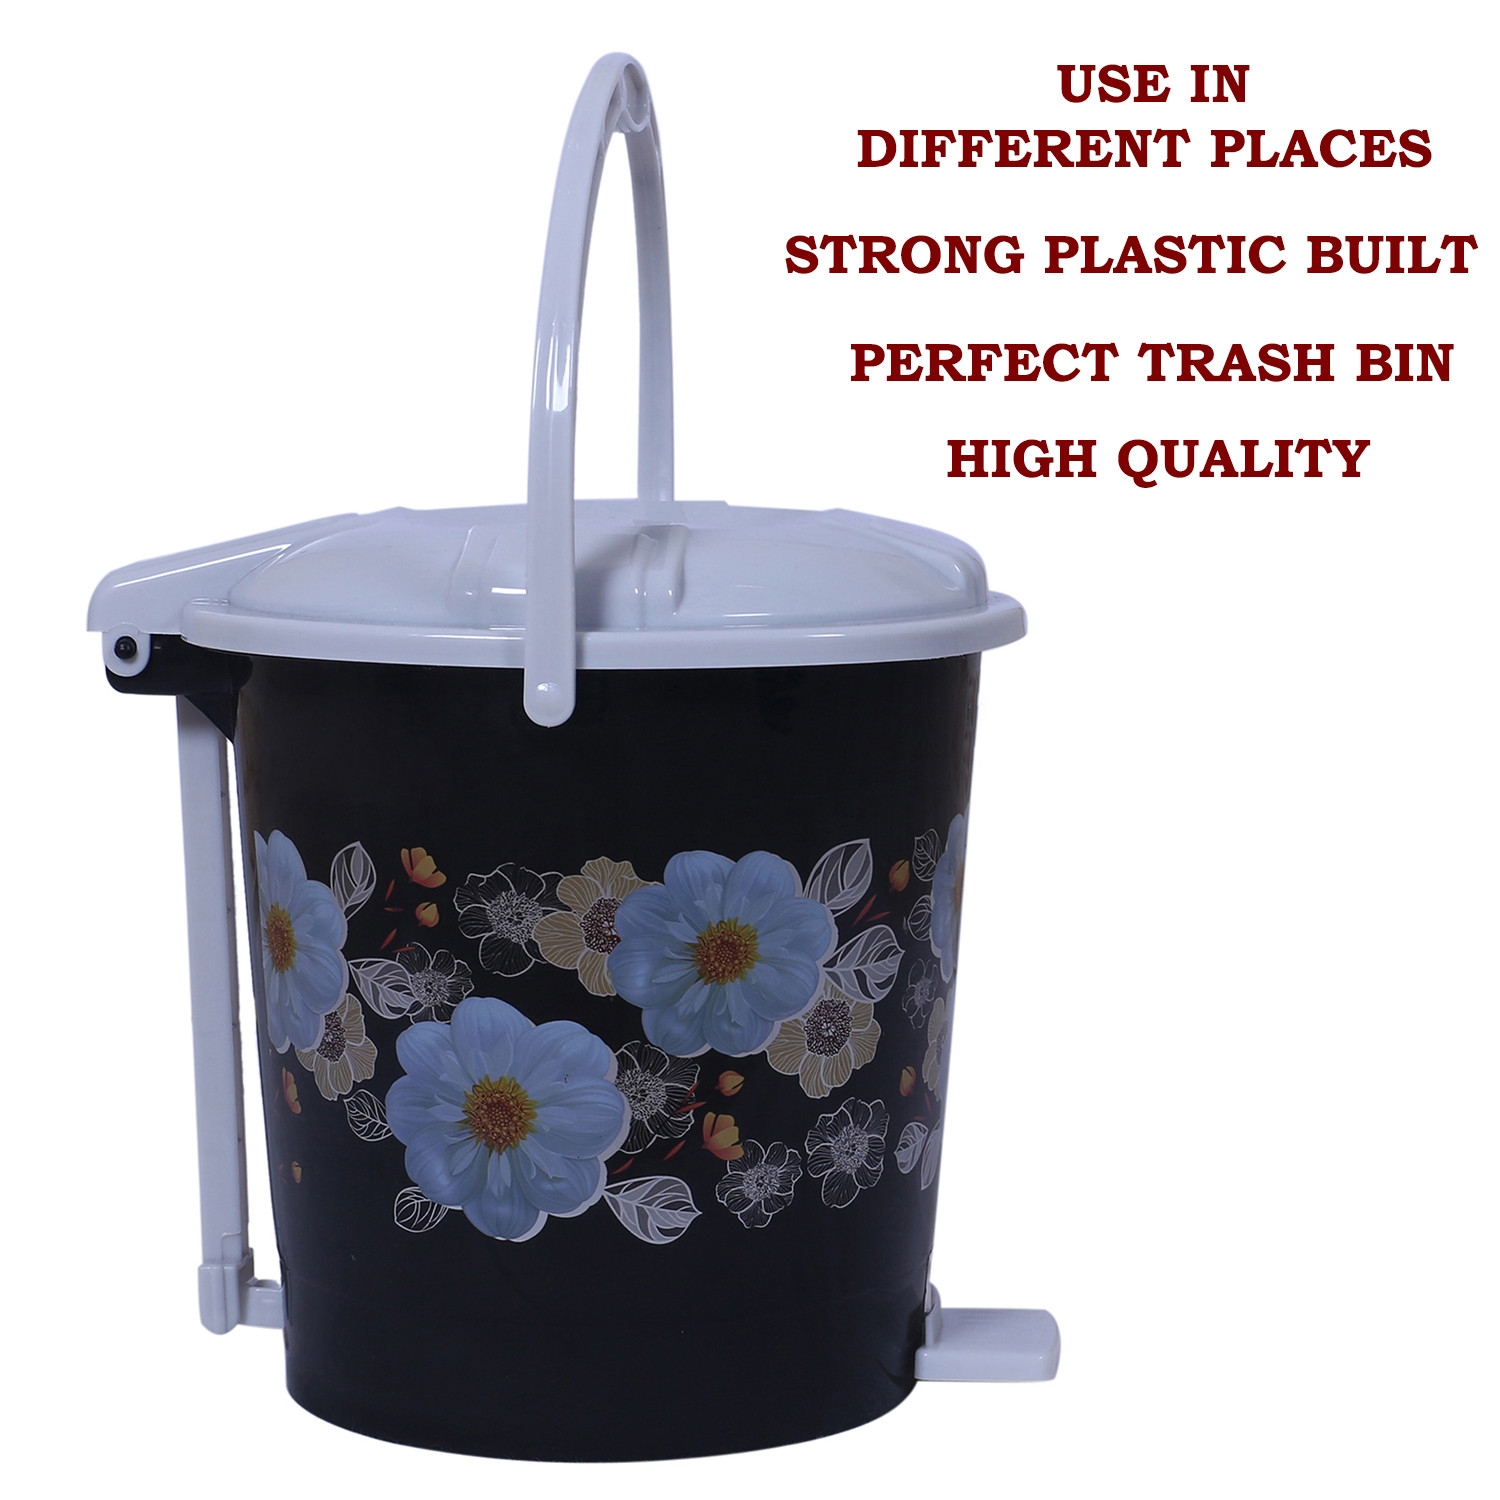 Kuber Industries Durable Flower Print Plastic Pedal Dustbin|Waste Bin|Trash Can For Kitchen & Home With Handle,7 Litre,Pack of 2 (Black)